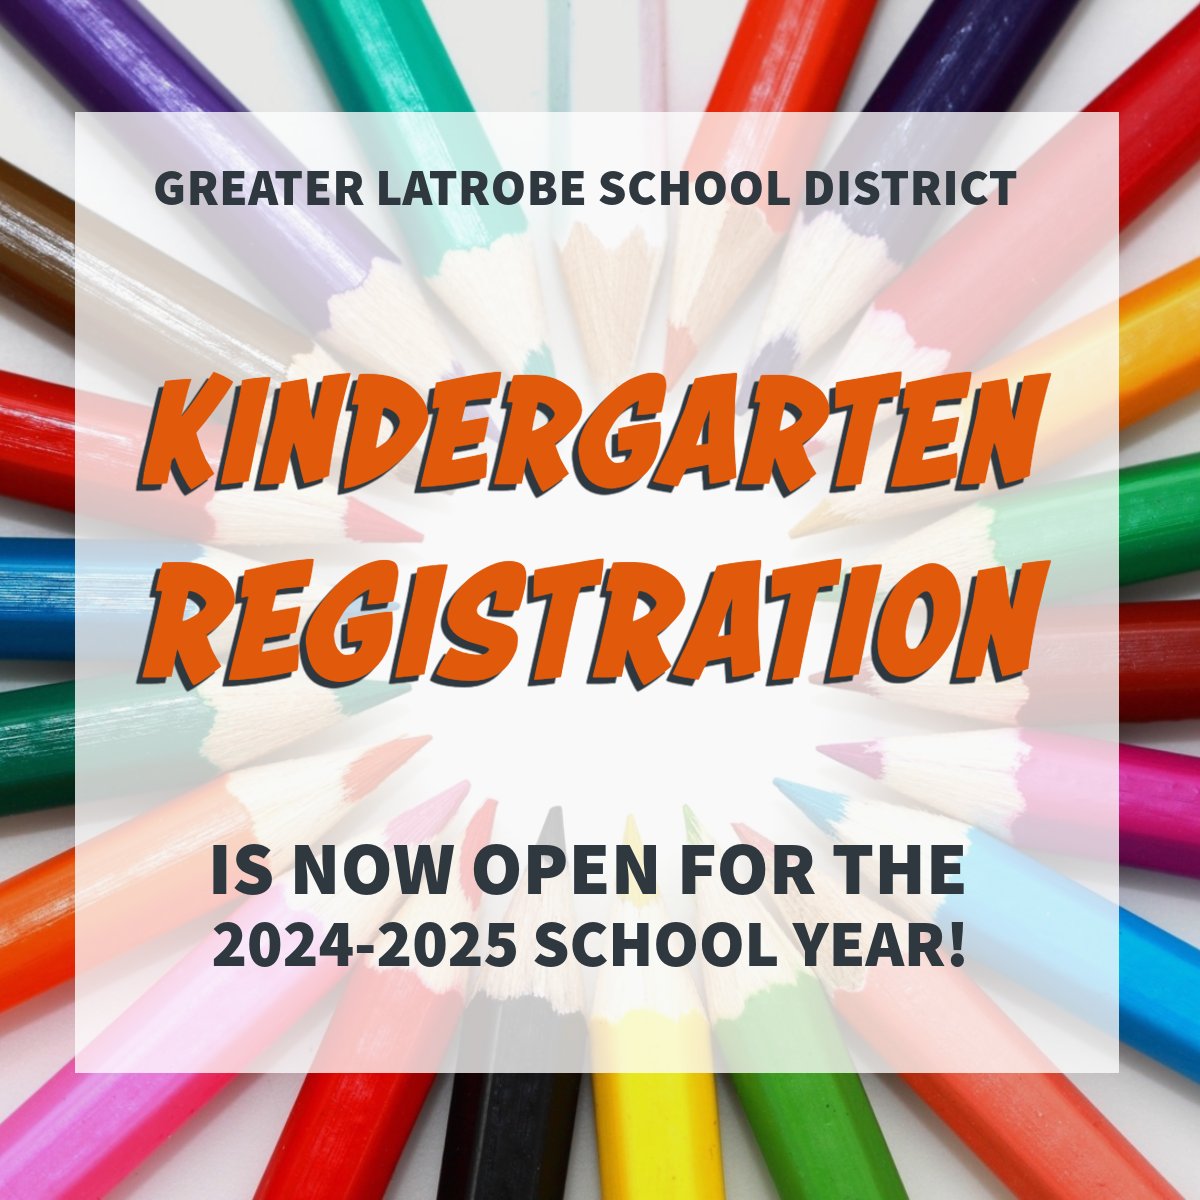 Kindergarten Registration for the 2024-2025 school year is now open. Visit glsd.us and click on 'Kindergarten 24-25' for more information and to register.